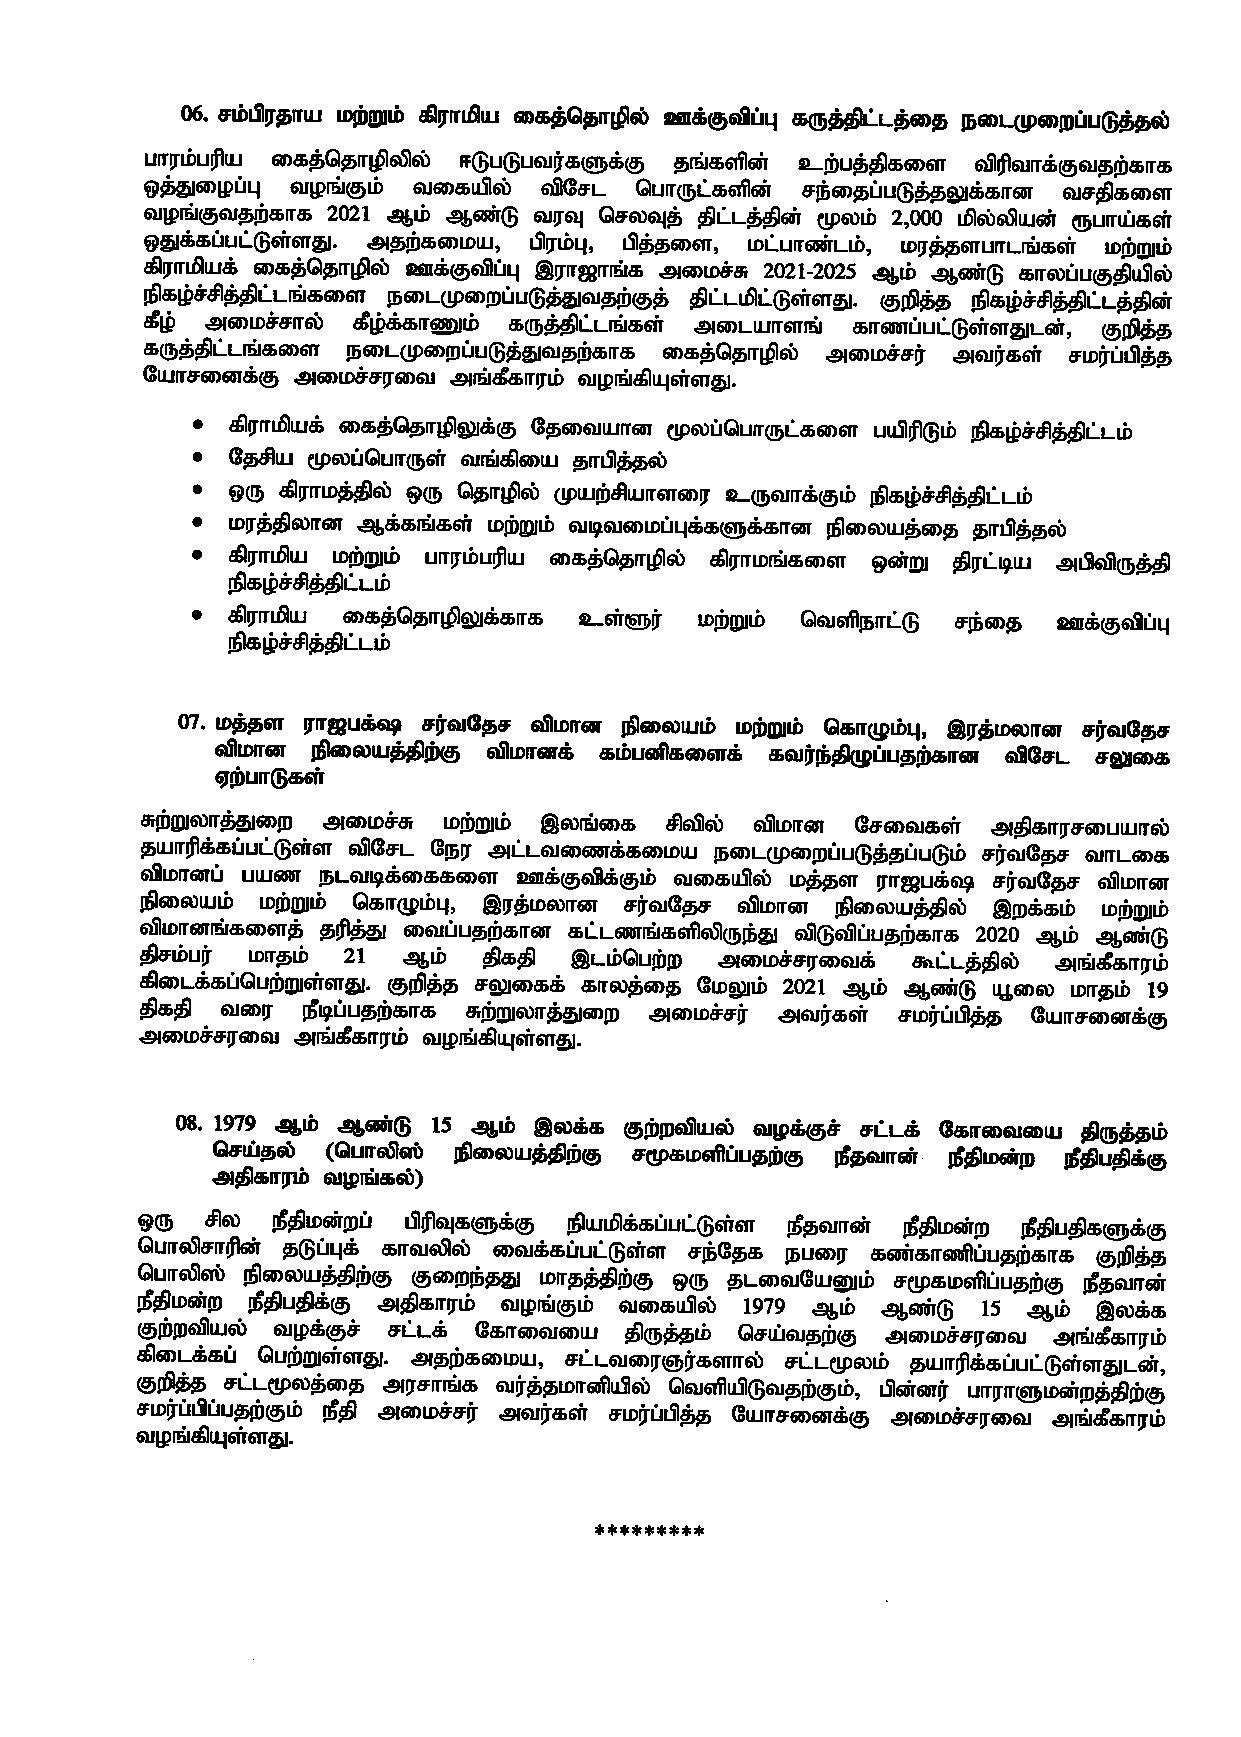 Cabinet Decison on 15.02.2021 Tamil page 003